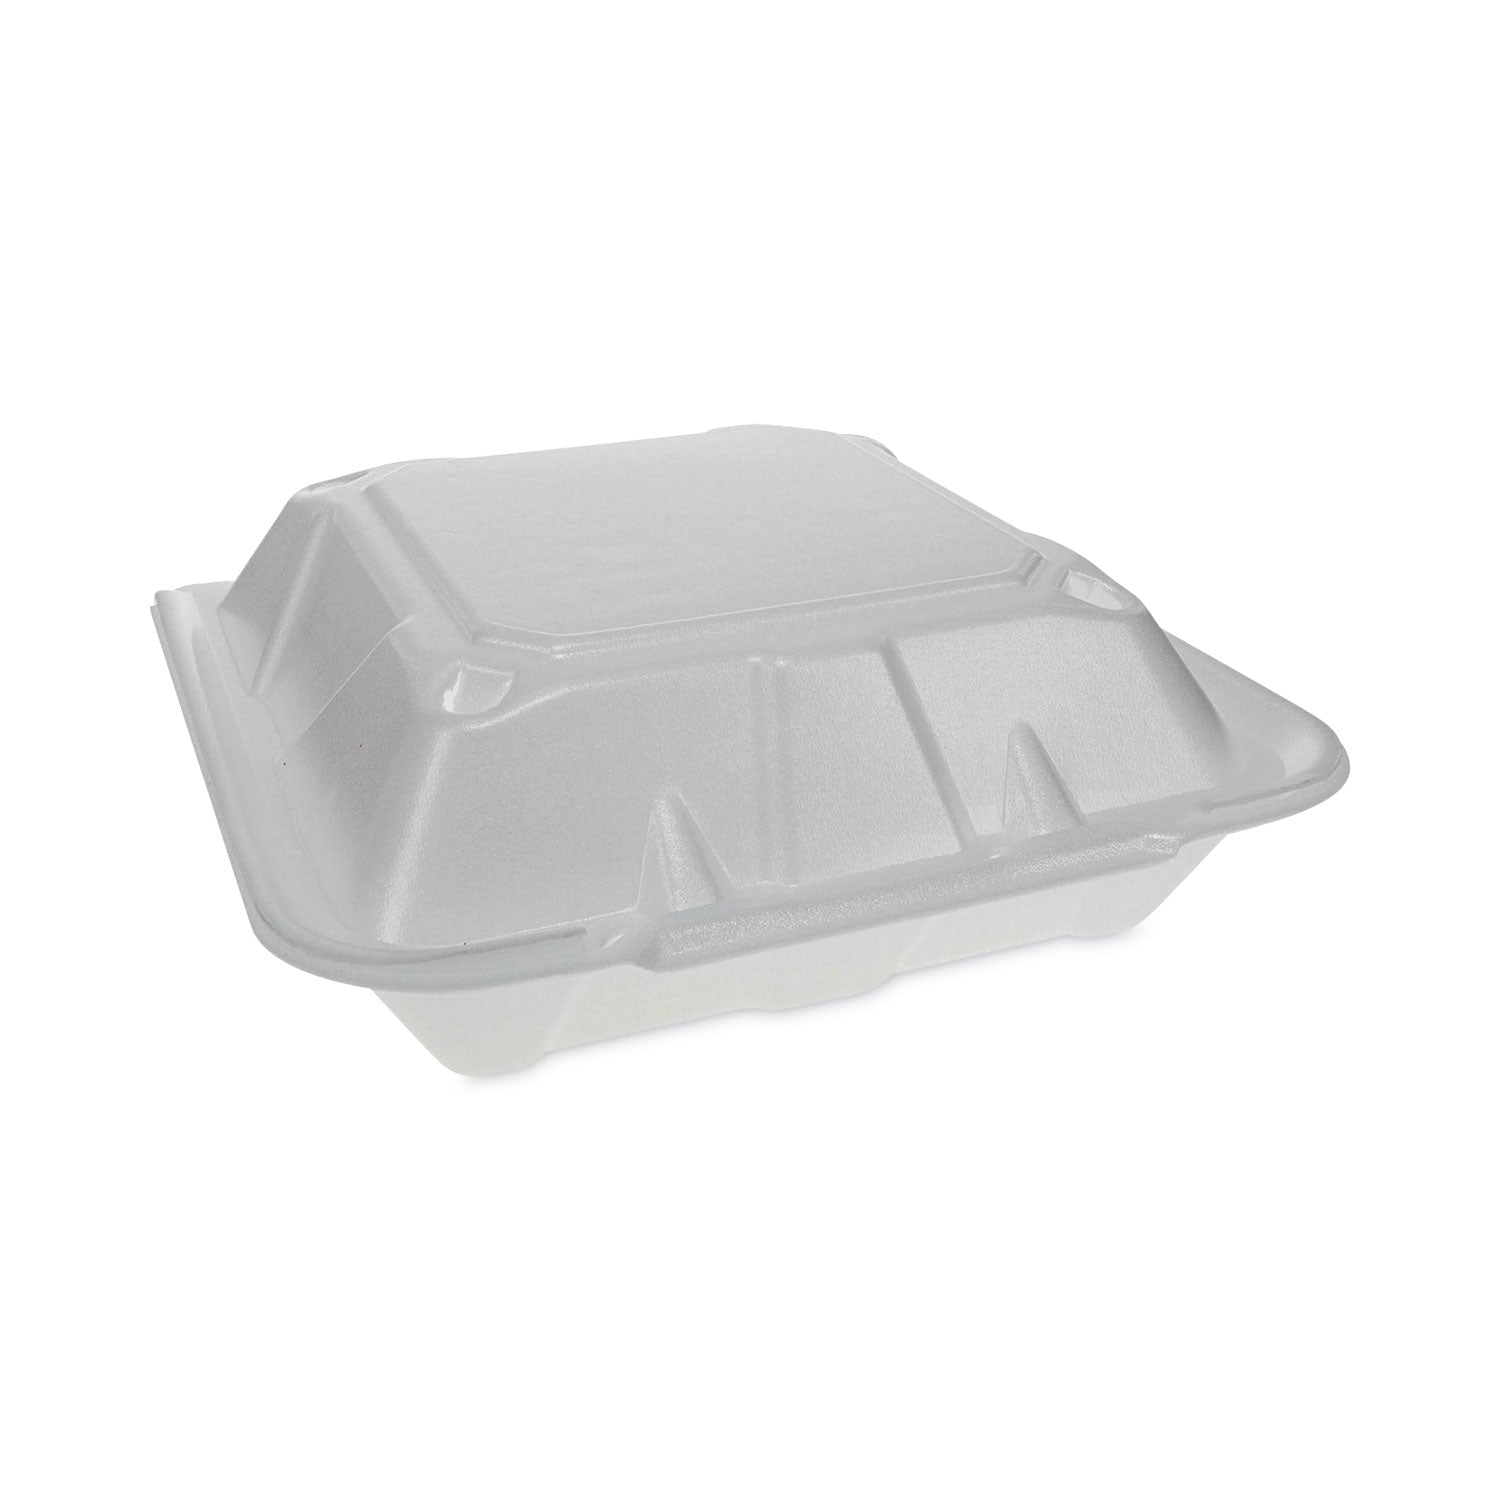 vented-foam-hinged-lid-container-dual-tab-lock-economy-3-compartment-913-x-9-x-325-white-150-carton_pctytd19903econ - 1